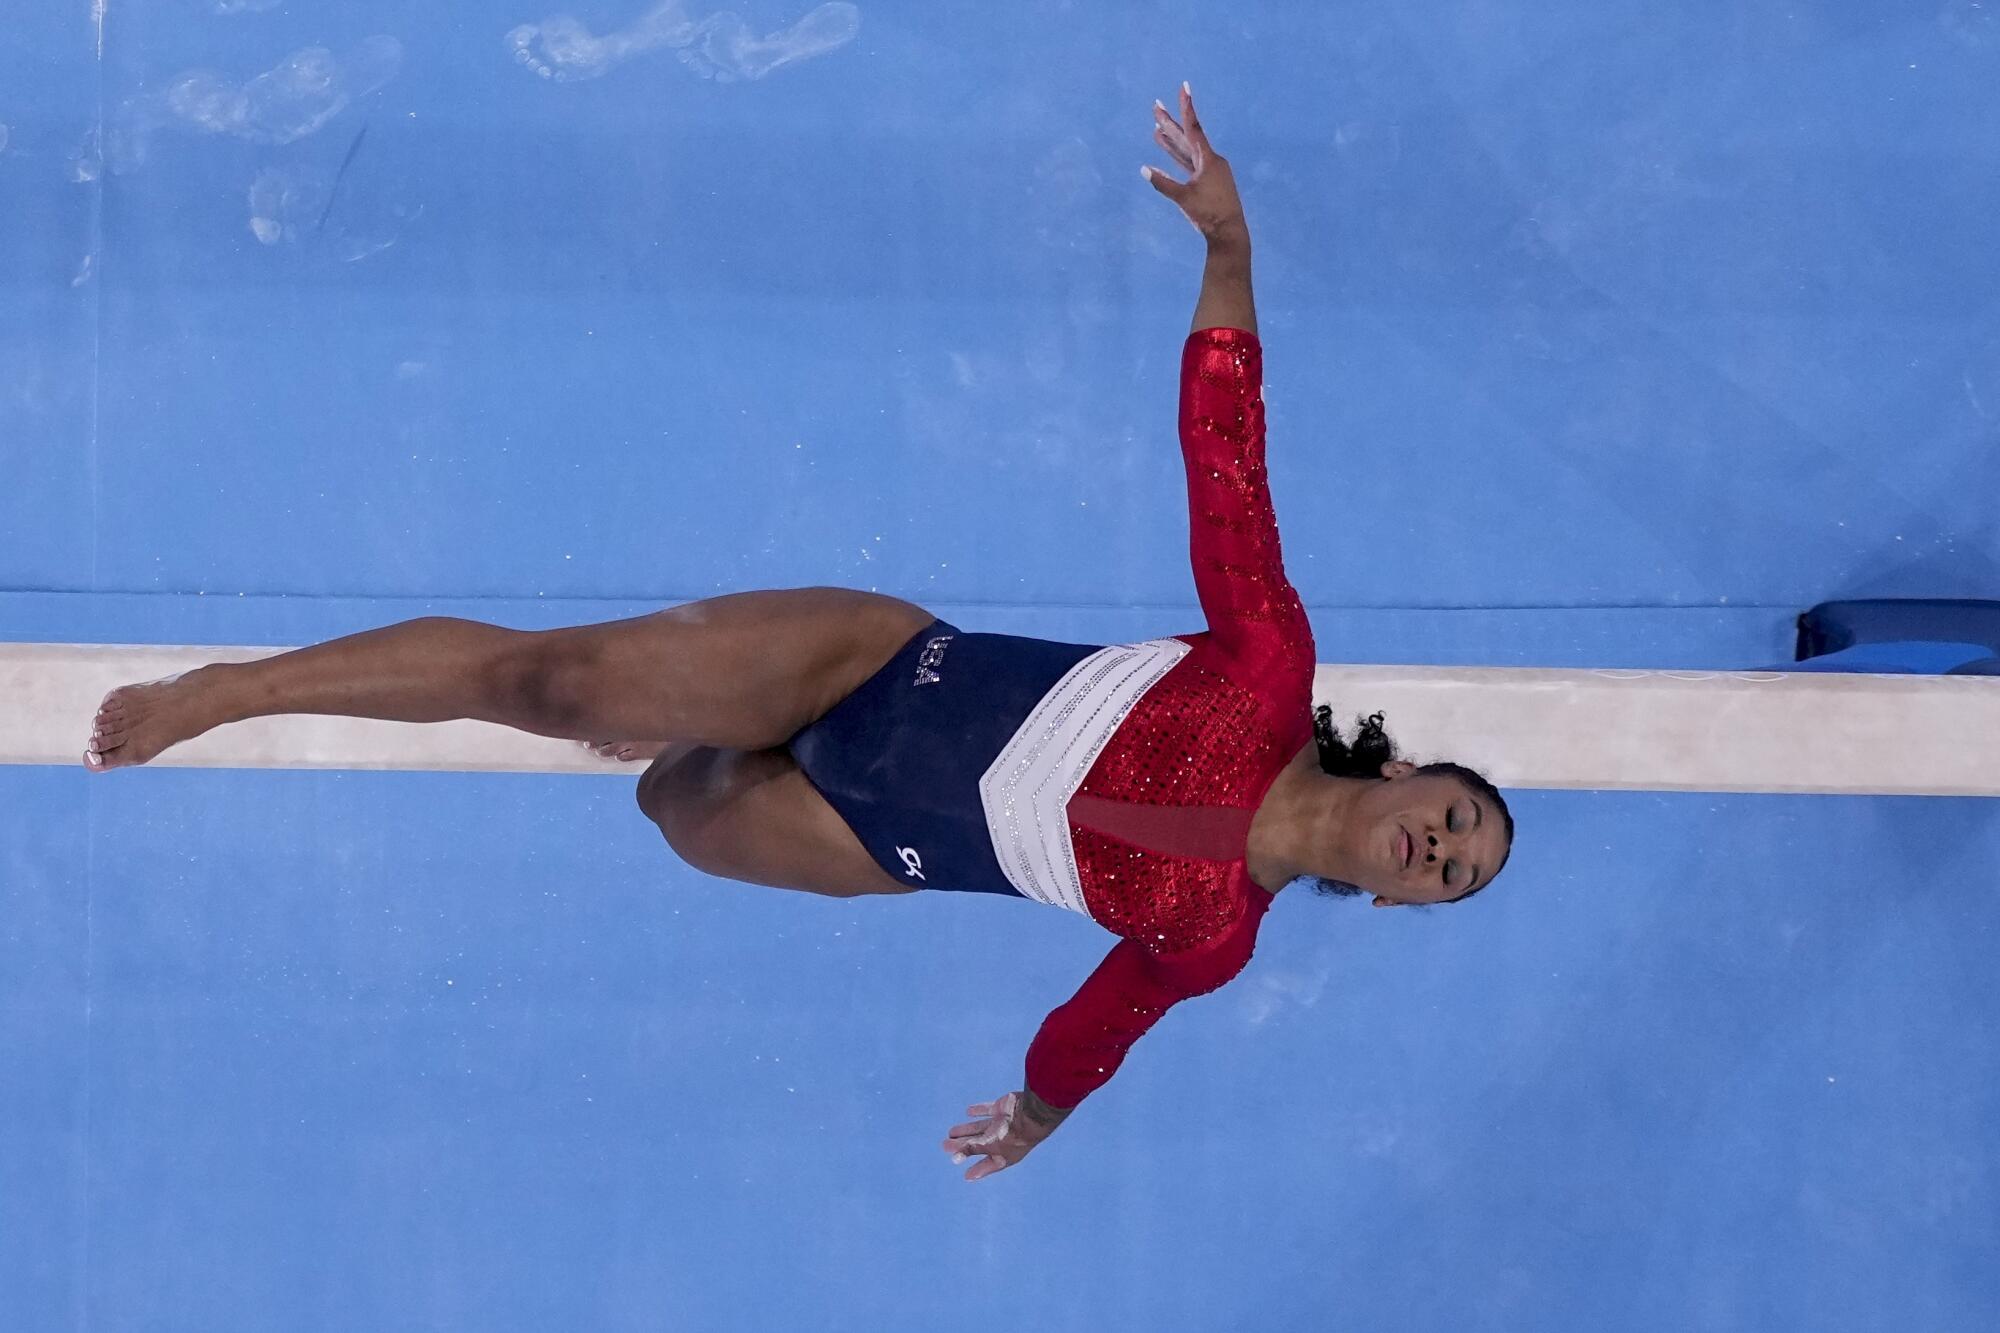 Jordan Chiles competes on the balance beam for the U.S. women's gymnastics team at the Tokyo Olympics in July 2021.